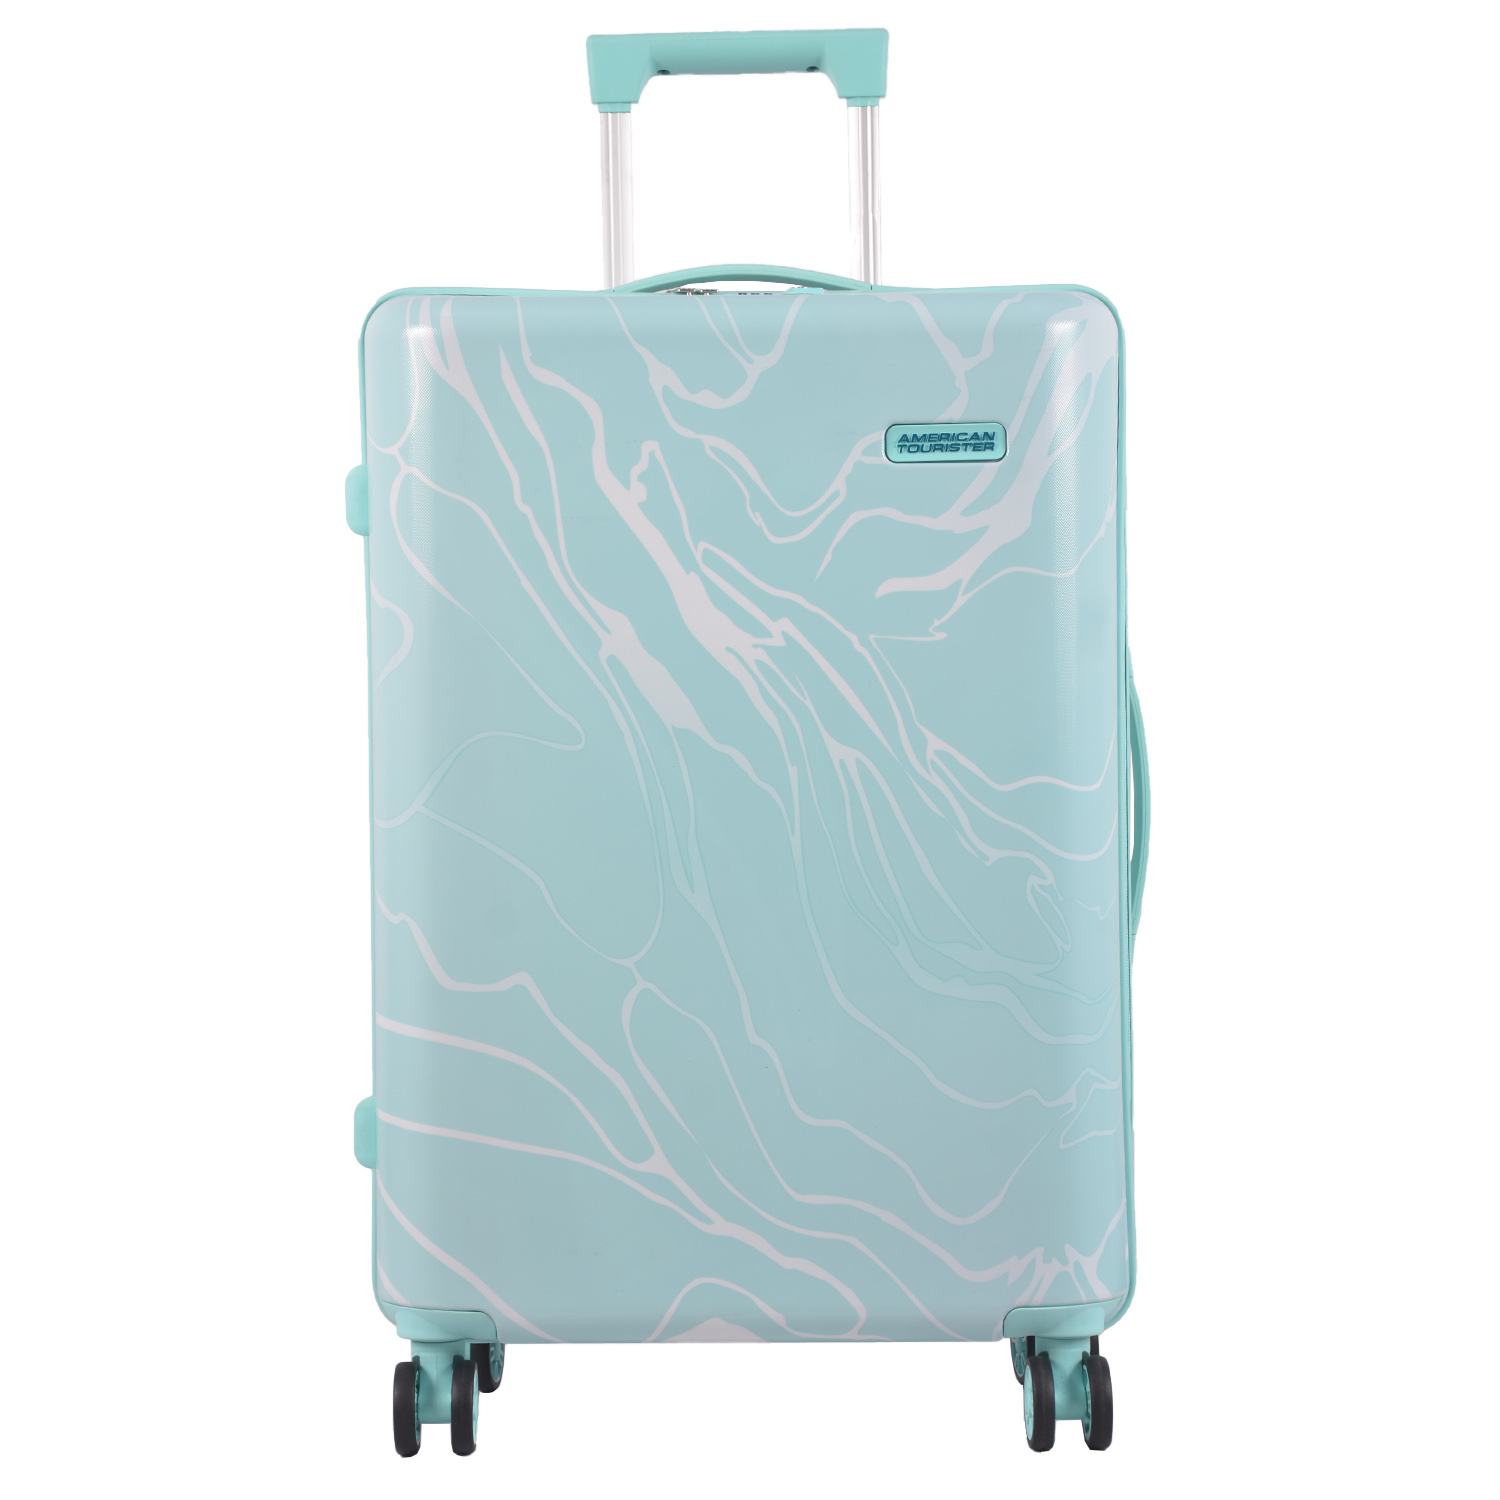 RoshanBags_AMERICAN TOURISTER VICENZA STROLLY BLUE TINT